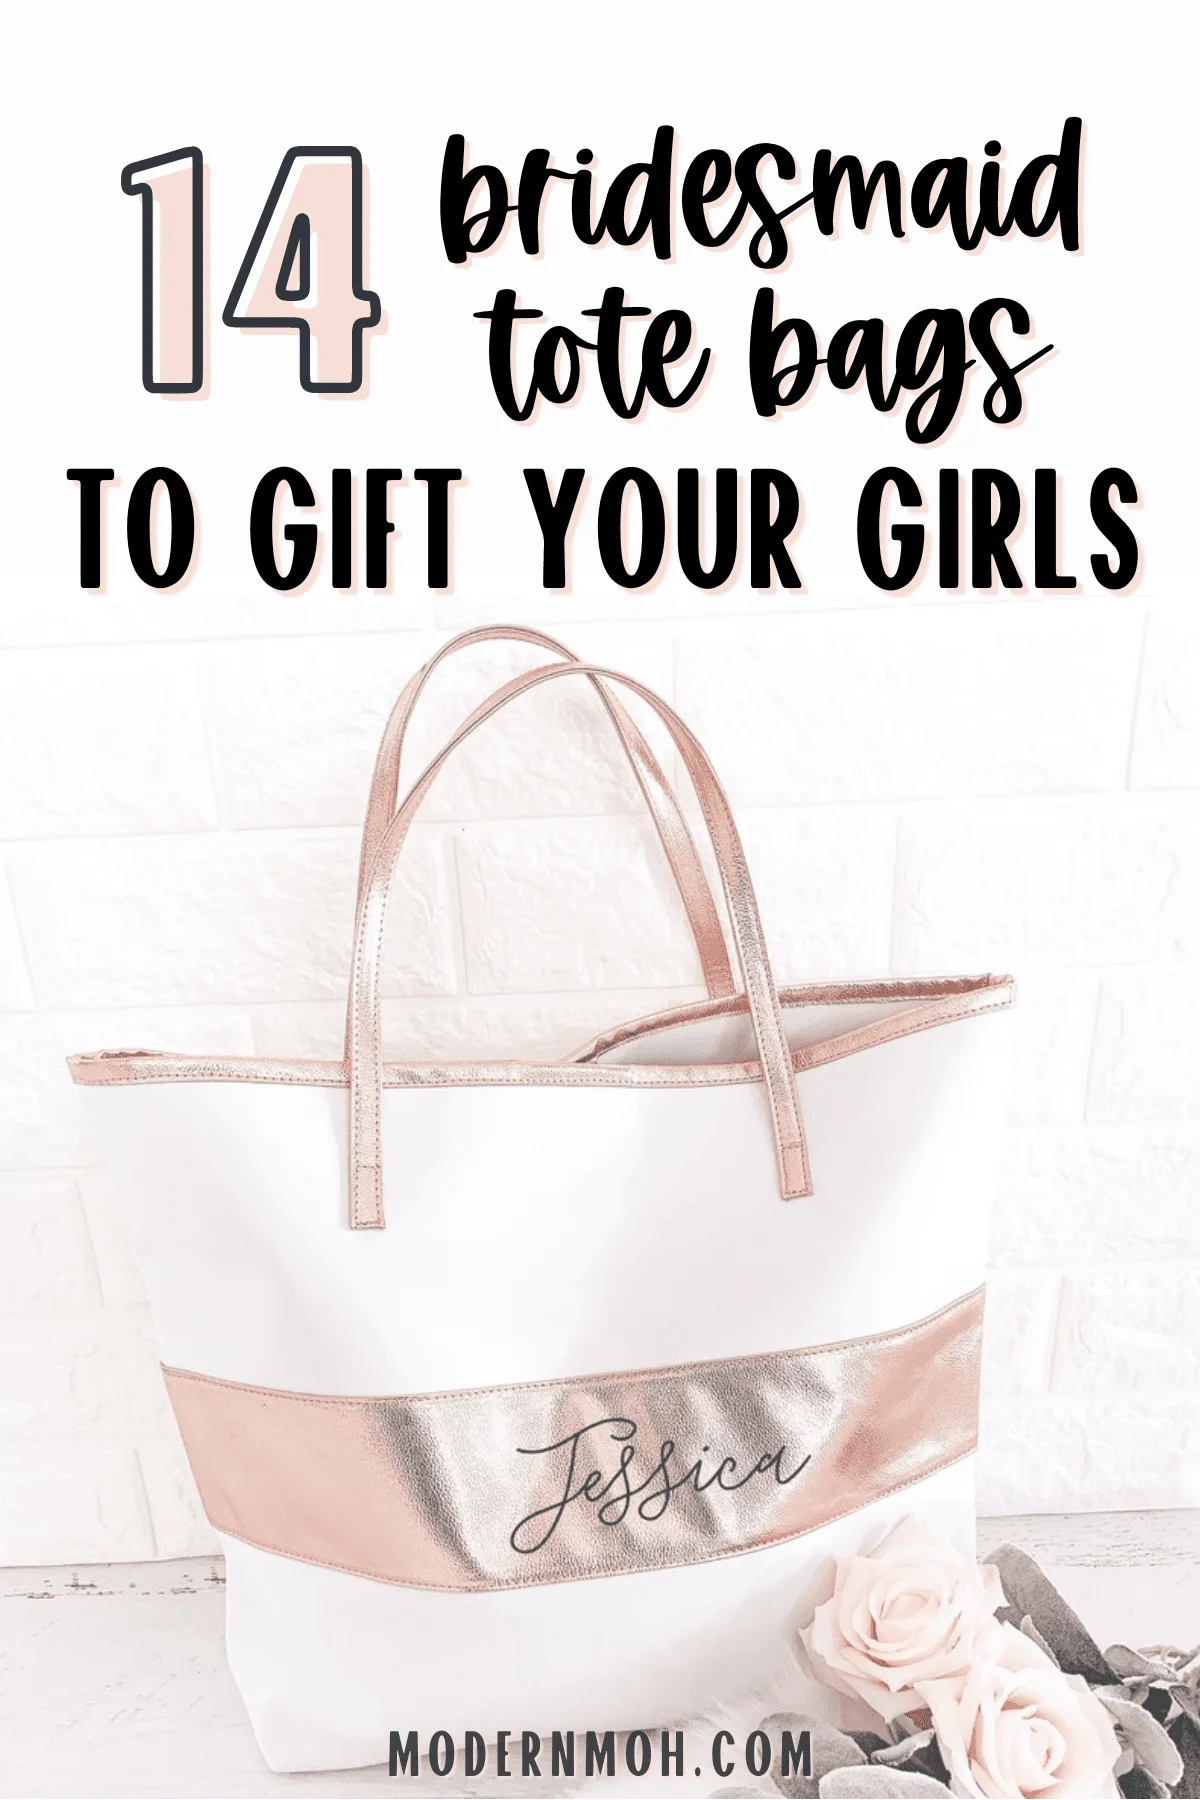 14 Bridesmaid Tote Bags for All Styles and Budgets